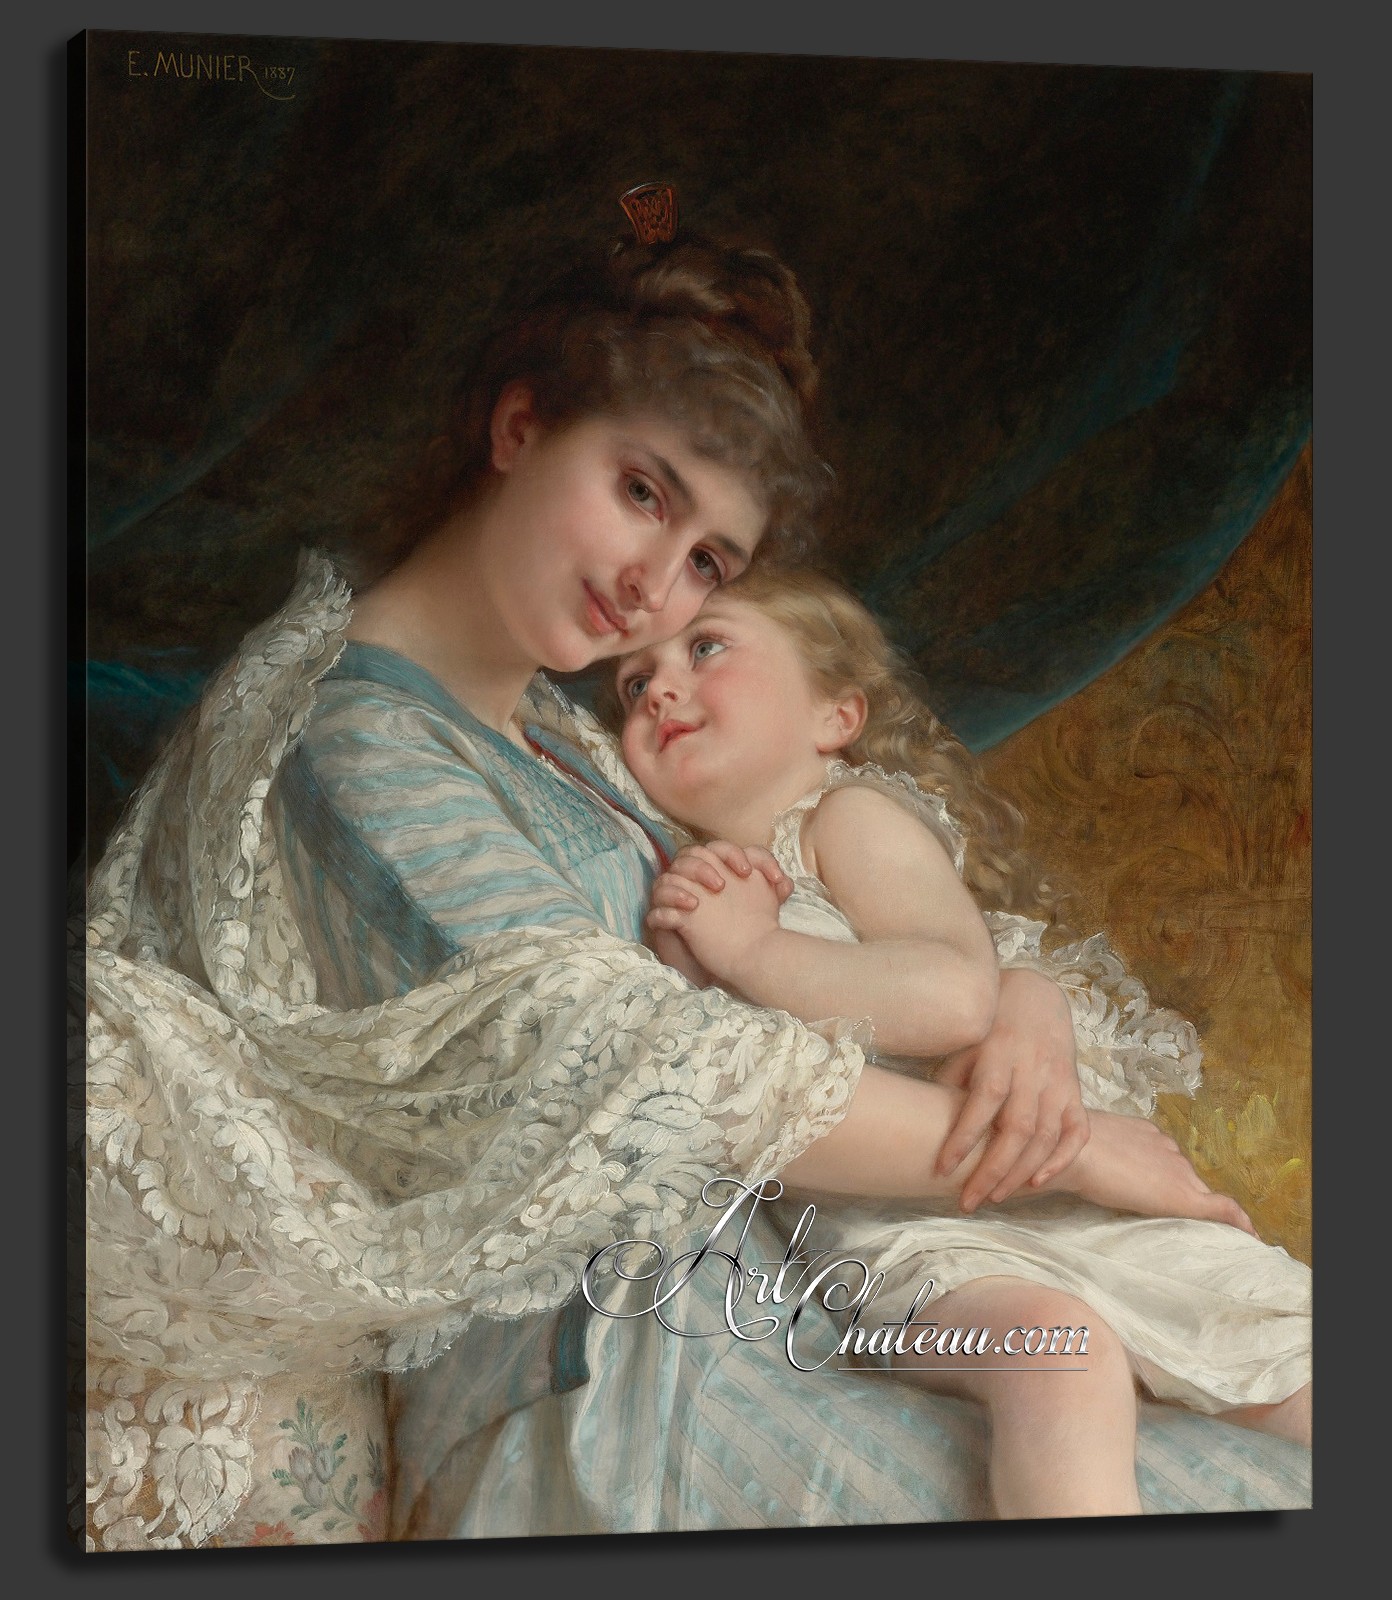 A Tender Embrace, after French artist Emile Munier